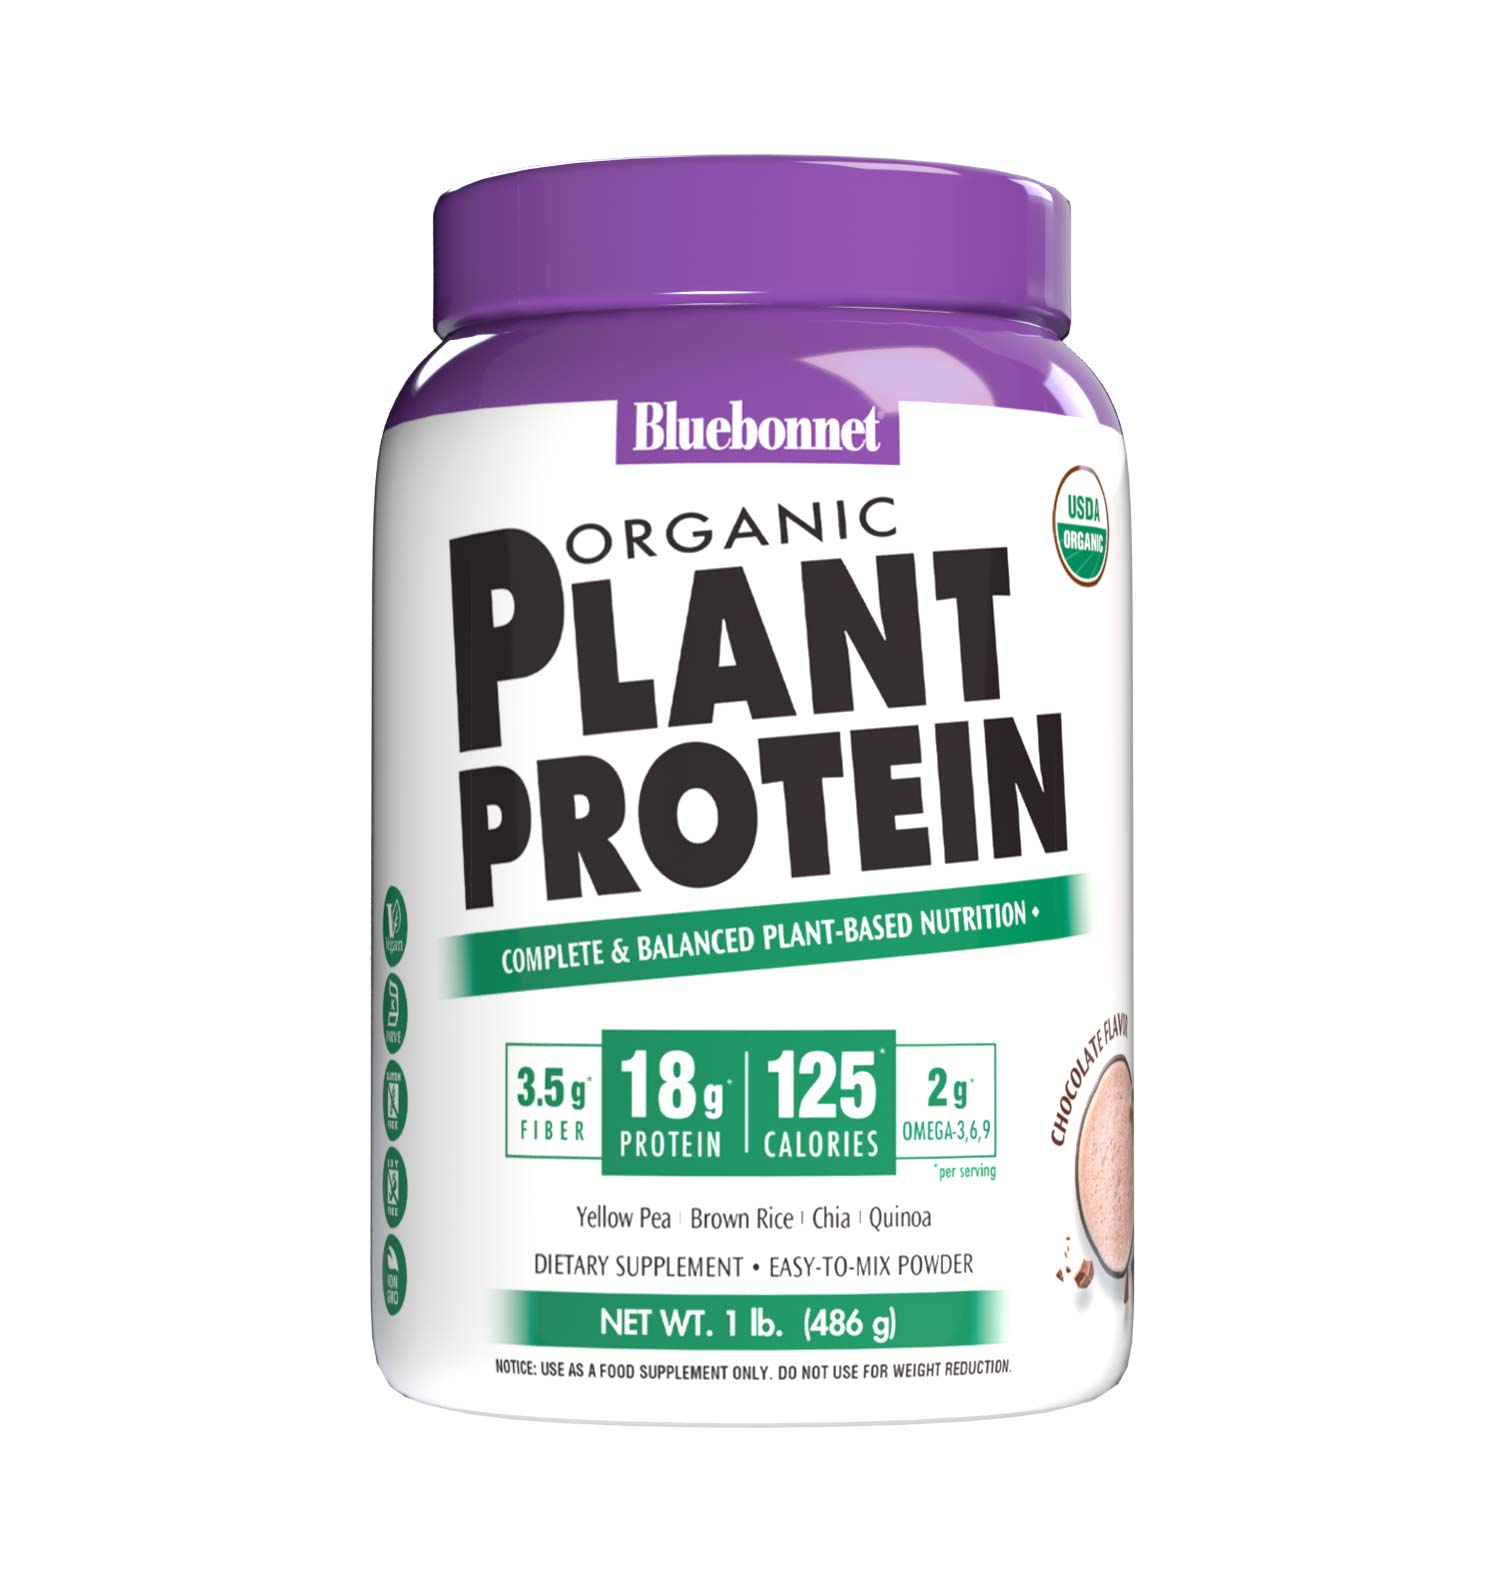 Bluebonnet’s Organic Plant Protein Chocolate flavored Powder provides significant quantities of sustainably harvested plant proteins: Organic sprouted whole grain brown rice protein concentrate, Organic yellow pea protein isolate, Organic chia sprout protein, Organic instantized quinoa seed protein. This unique blend of four powerful plant proteins collectively delivers a balance of all nine essential amino acids similar to high-quality animal protein. #size_1 lb